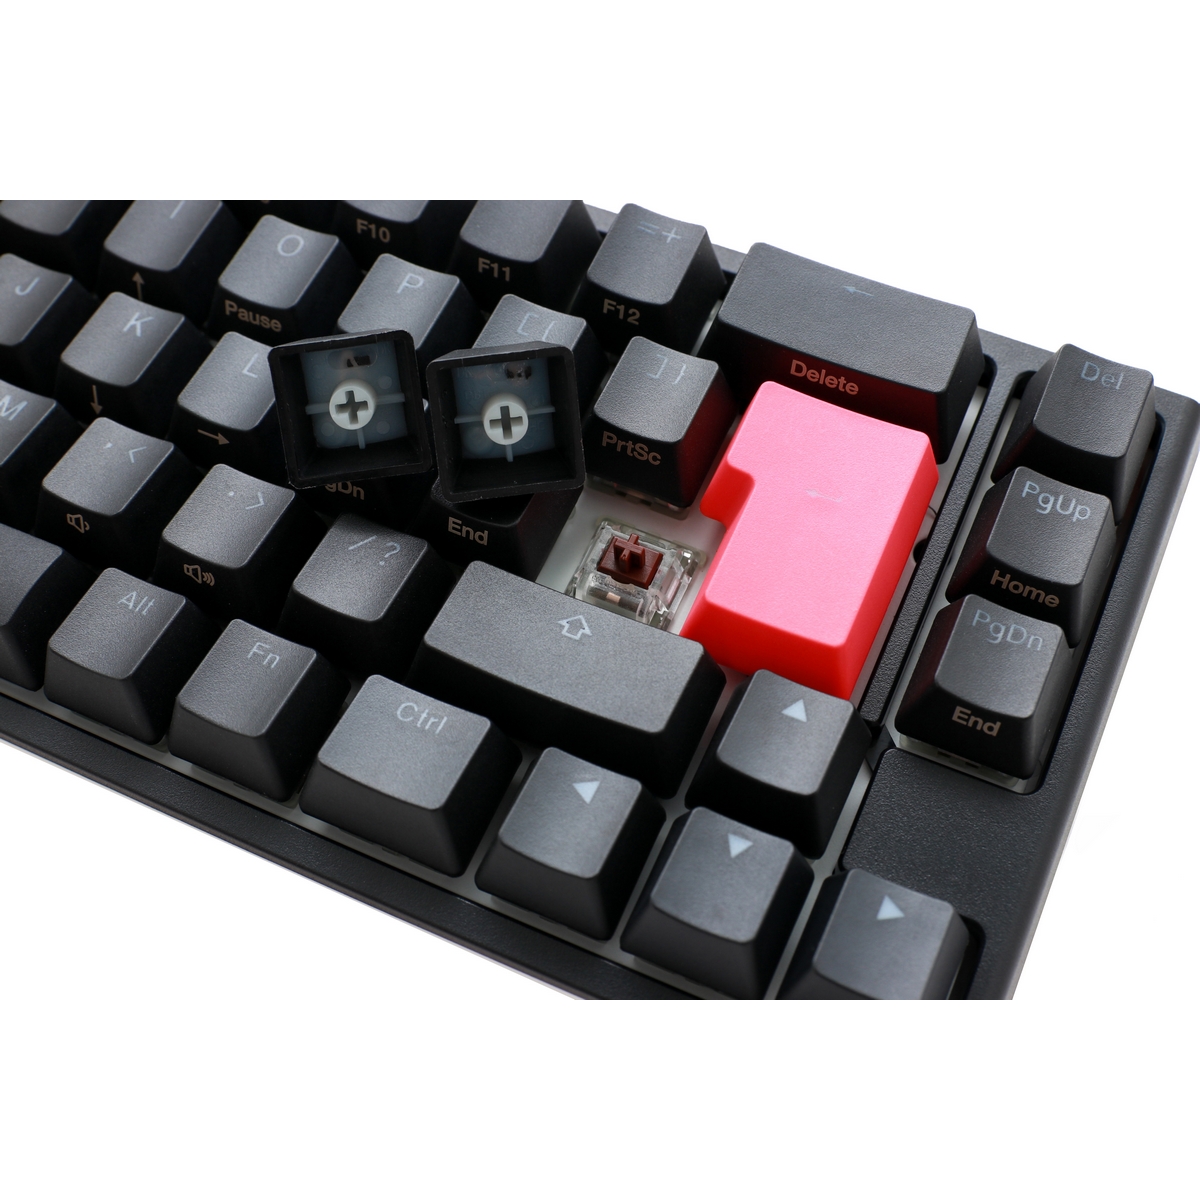 Ducky - Ducky One 2 SF 65% RGB Backlit Speed Silver Cherry MX Switch USB Mechanical Gaming Keyboard UK Layout